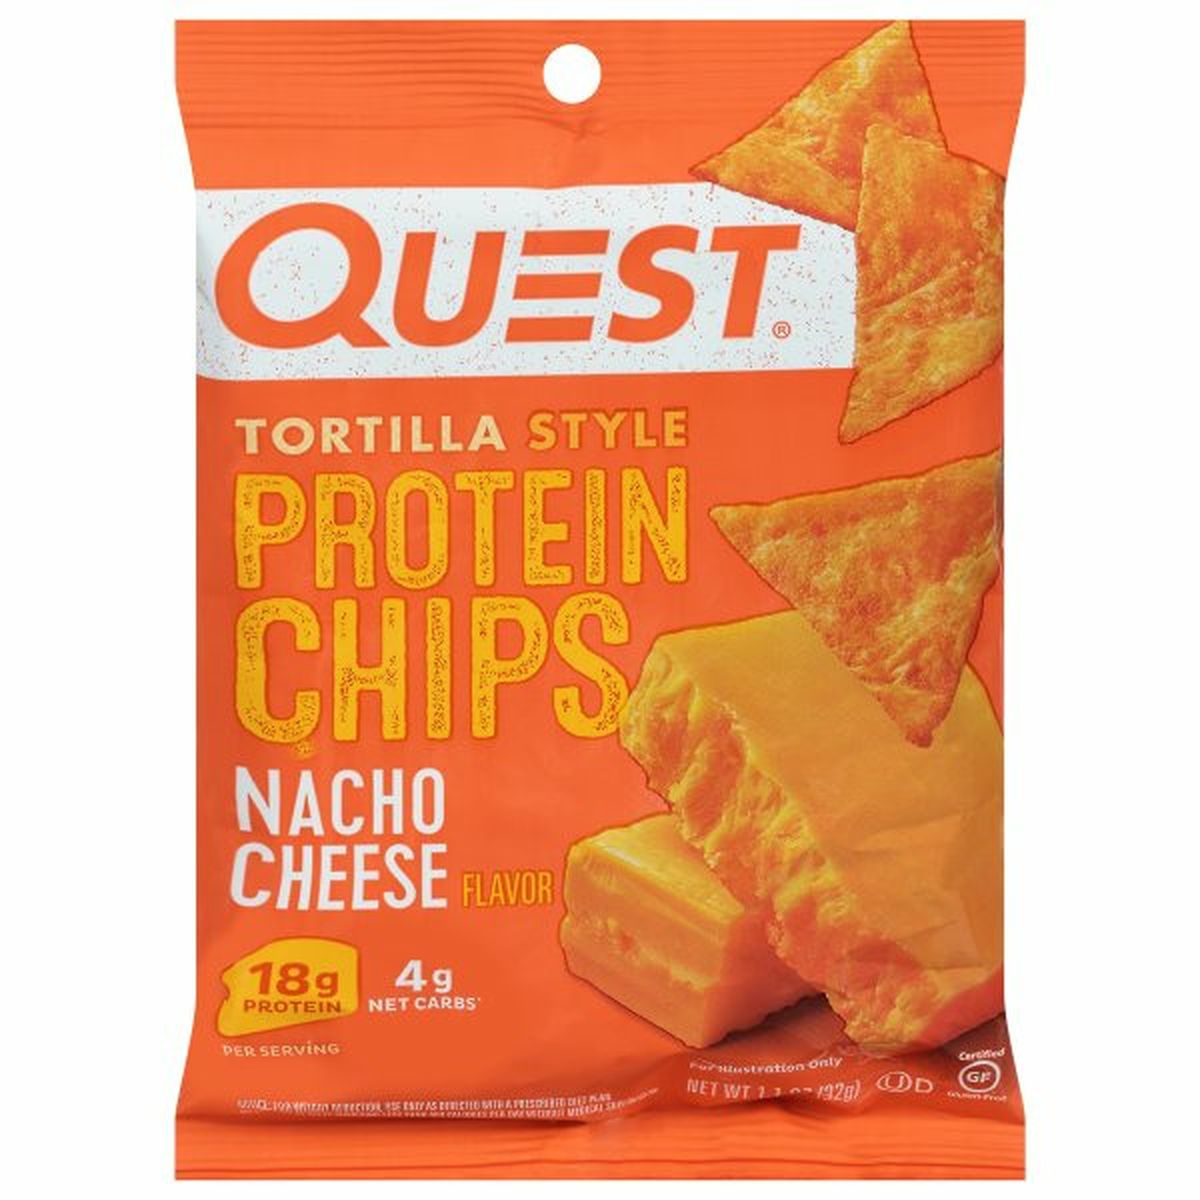 Calories in Quest Protein Chips, Nacho Cheese Flavor, Tortilla Style